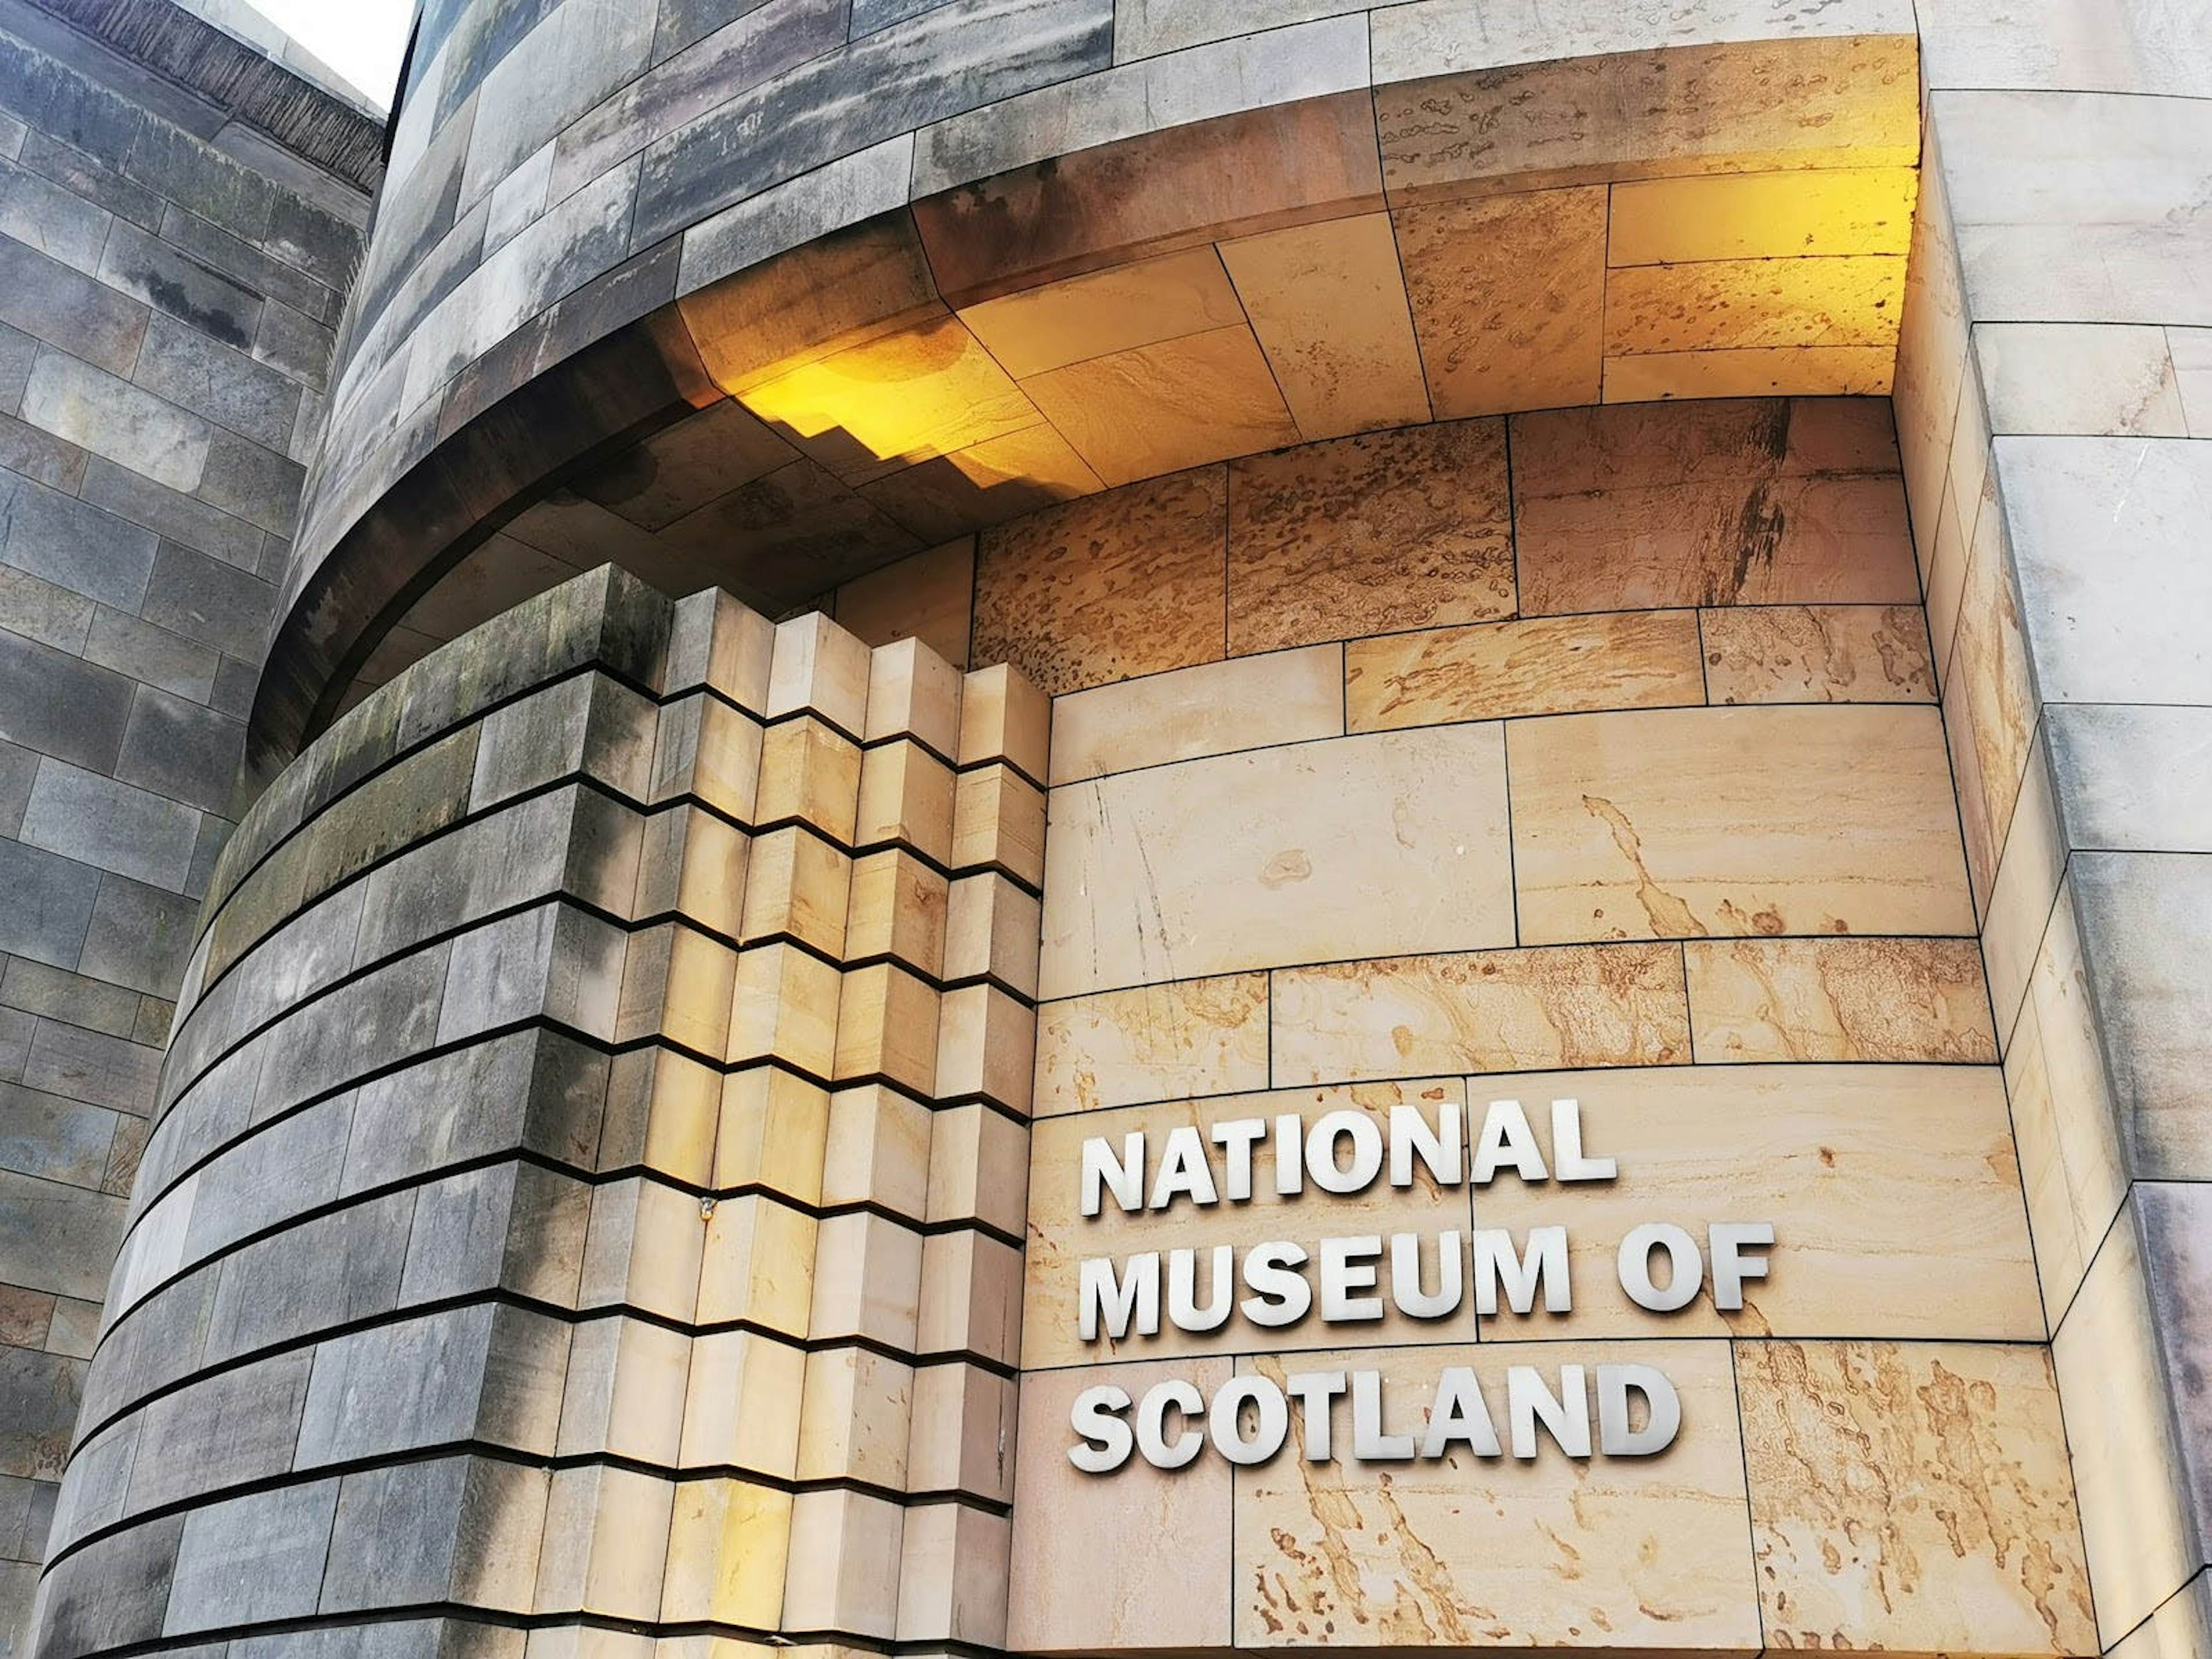 National Museum of Scotland - >Mihail.T</a>